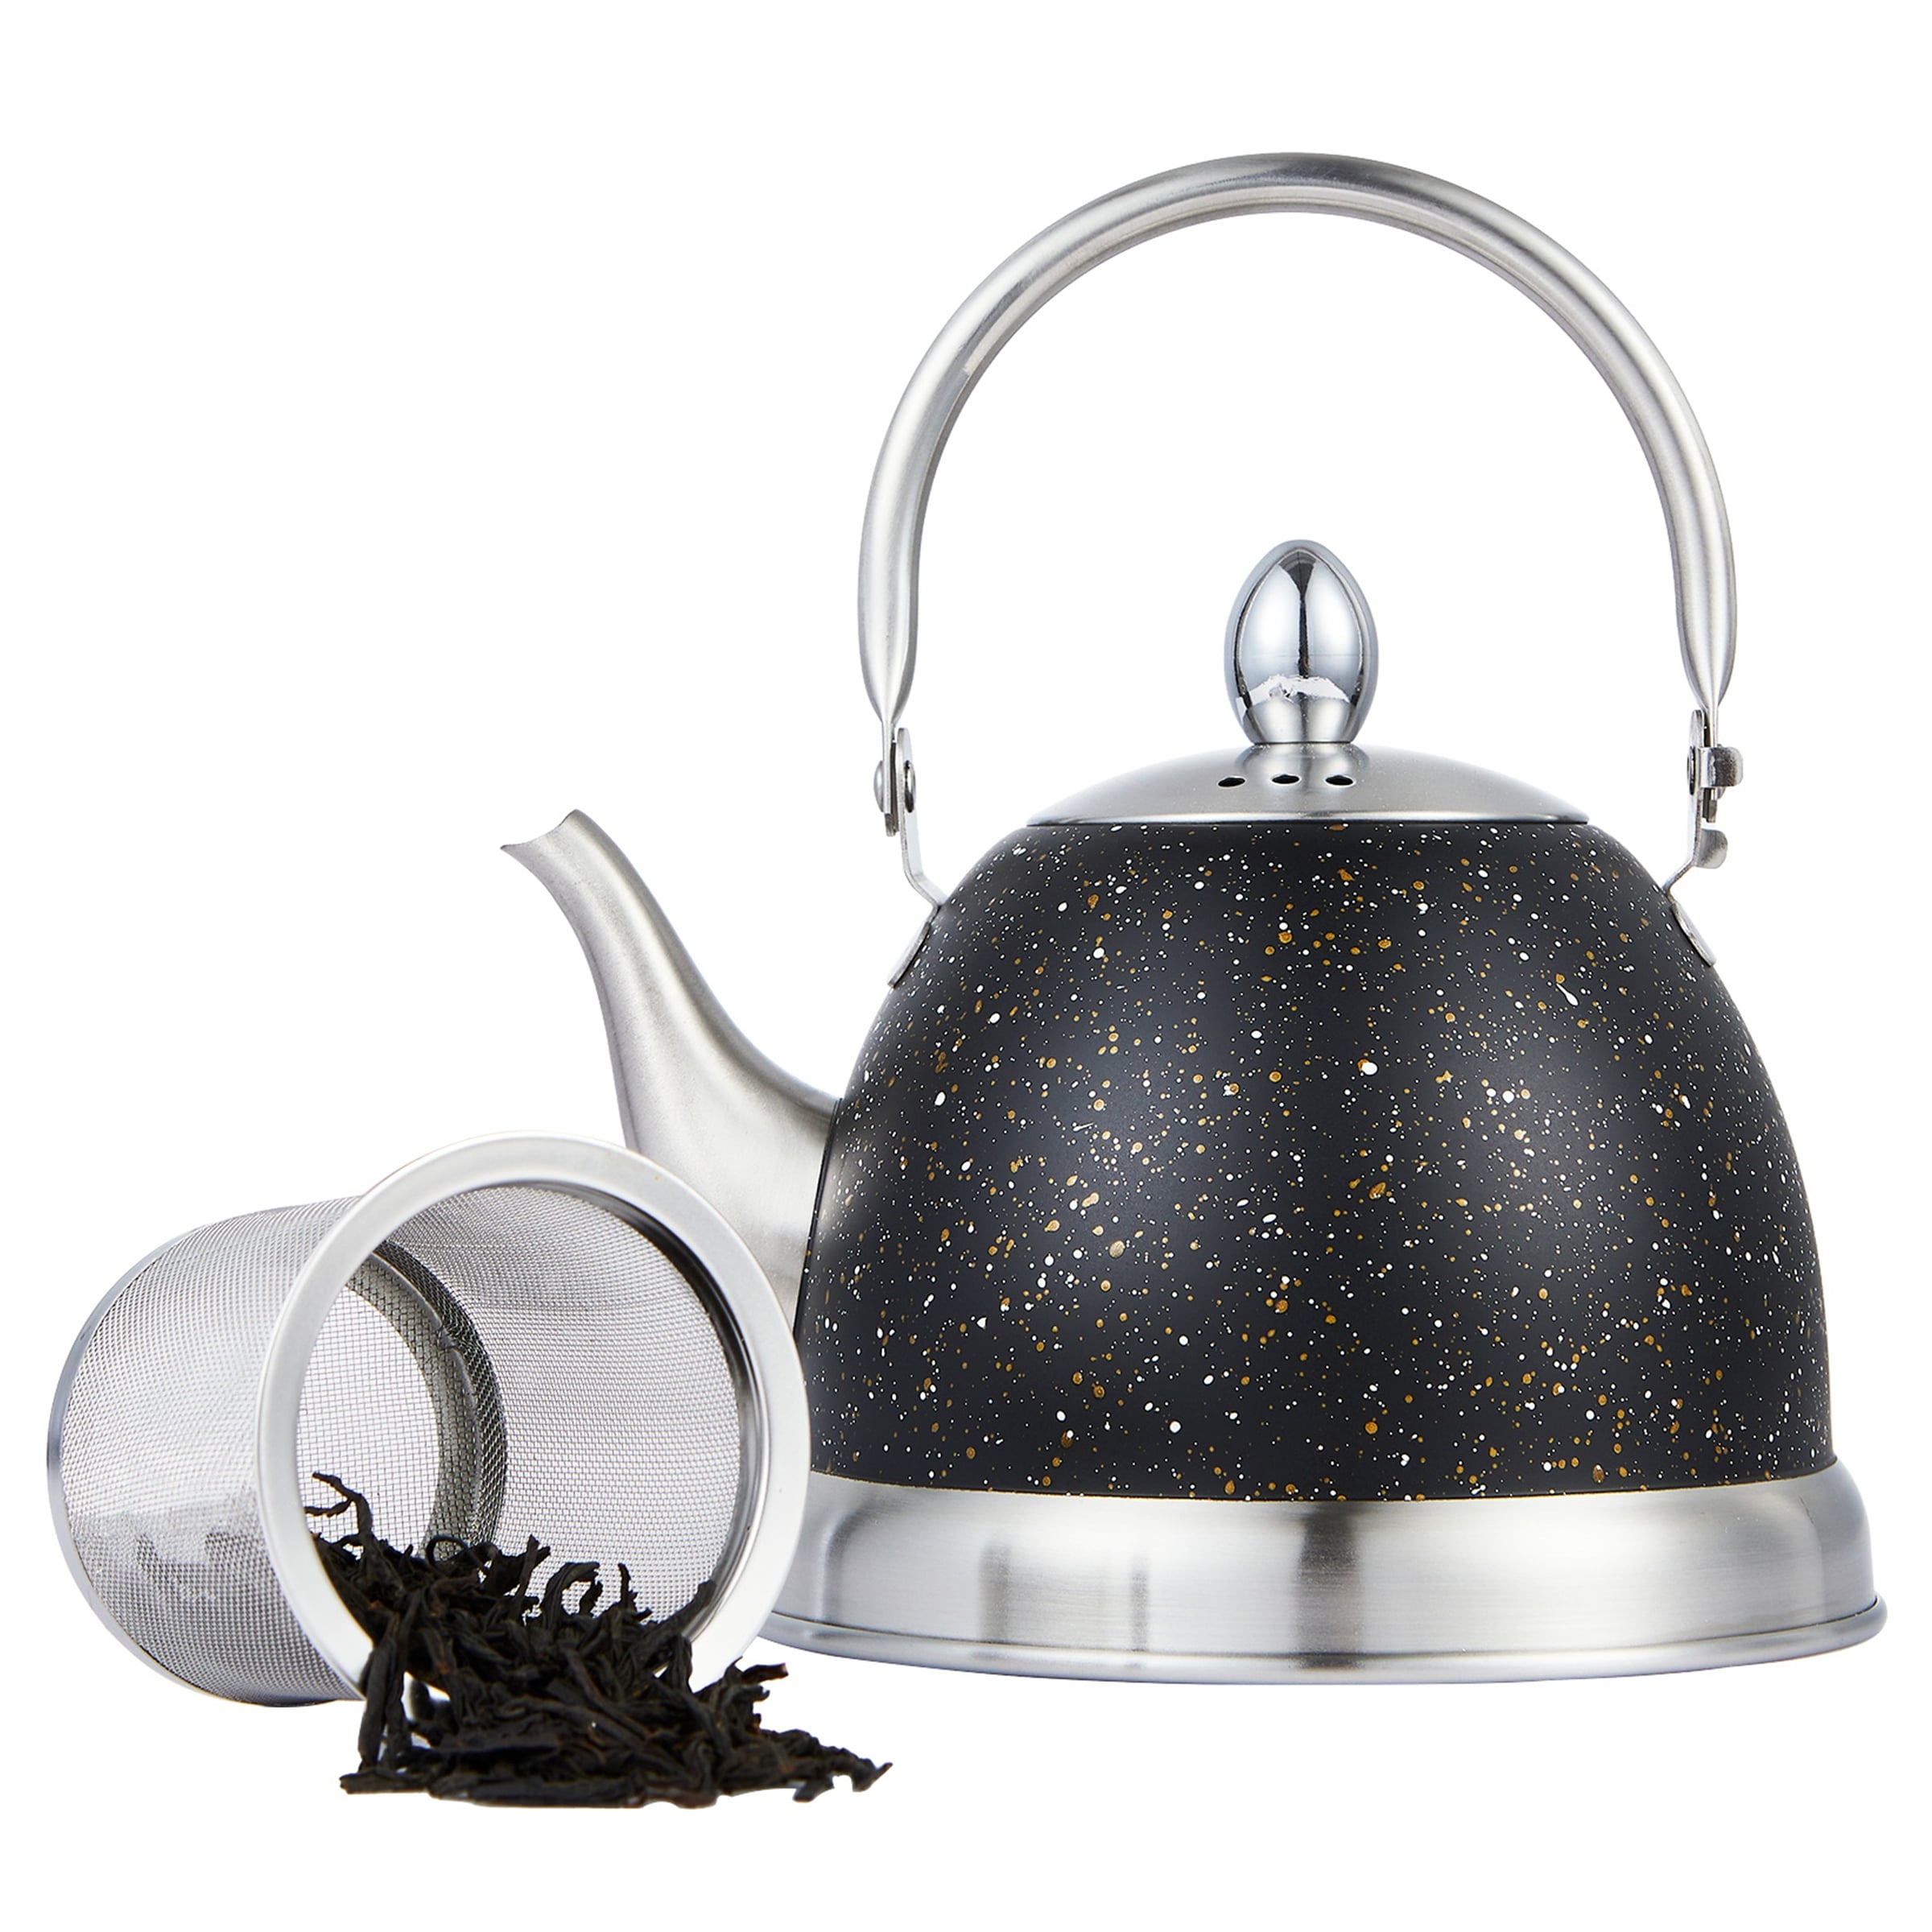 https://ak1.ostkcdn.com/images/products/is/images/direct/3fa82133ca61fca861ff8e85f3d8ec3fc661566a/Creative-Home-1.0-Qt.-Stainless-Steel-Tea-Infuser-Kettle-with-Folding-Handle%2C-Infuser-Basket%2C-Opaque-Black-with-Speckle.jpg